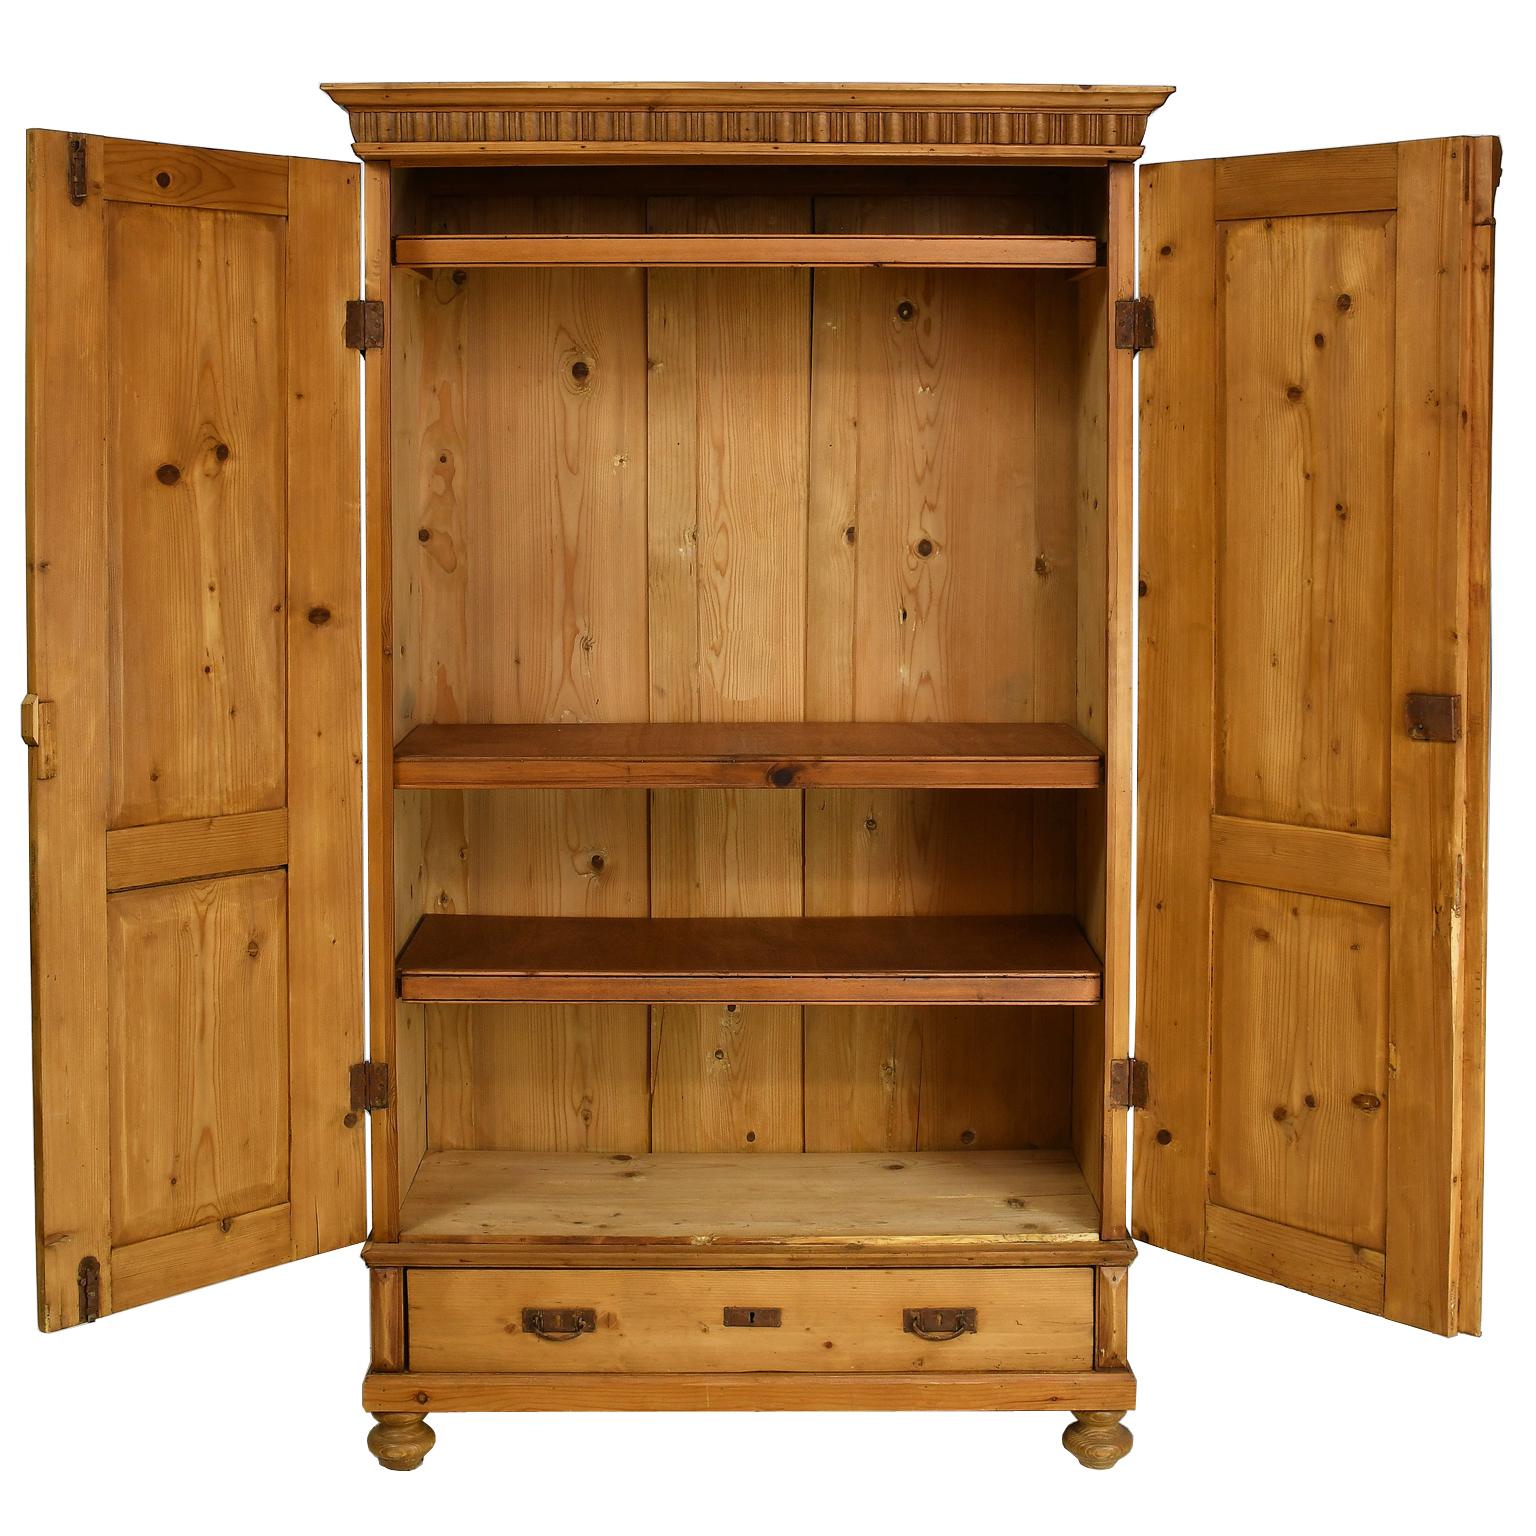 A lovely armoire in honey-colored pine with carved crown molding over two doors that open to three fixed shelves and rests on a base with one exterior drawer. Each door has two recessed panels, with carved acanthus leaf motif embellishing the top